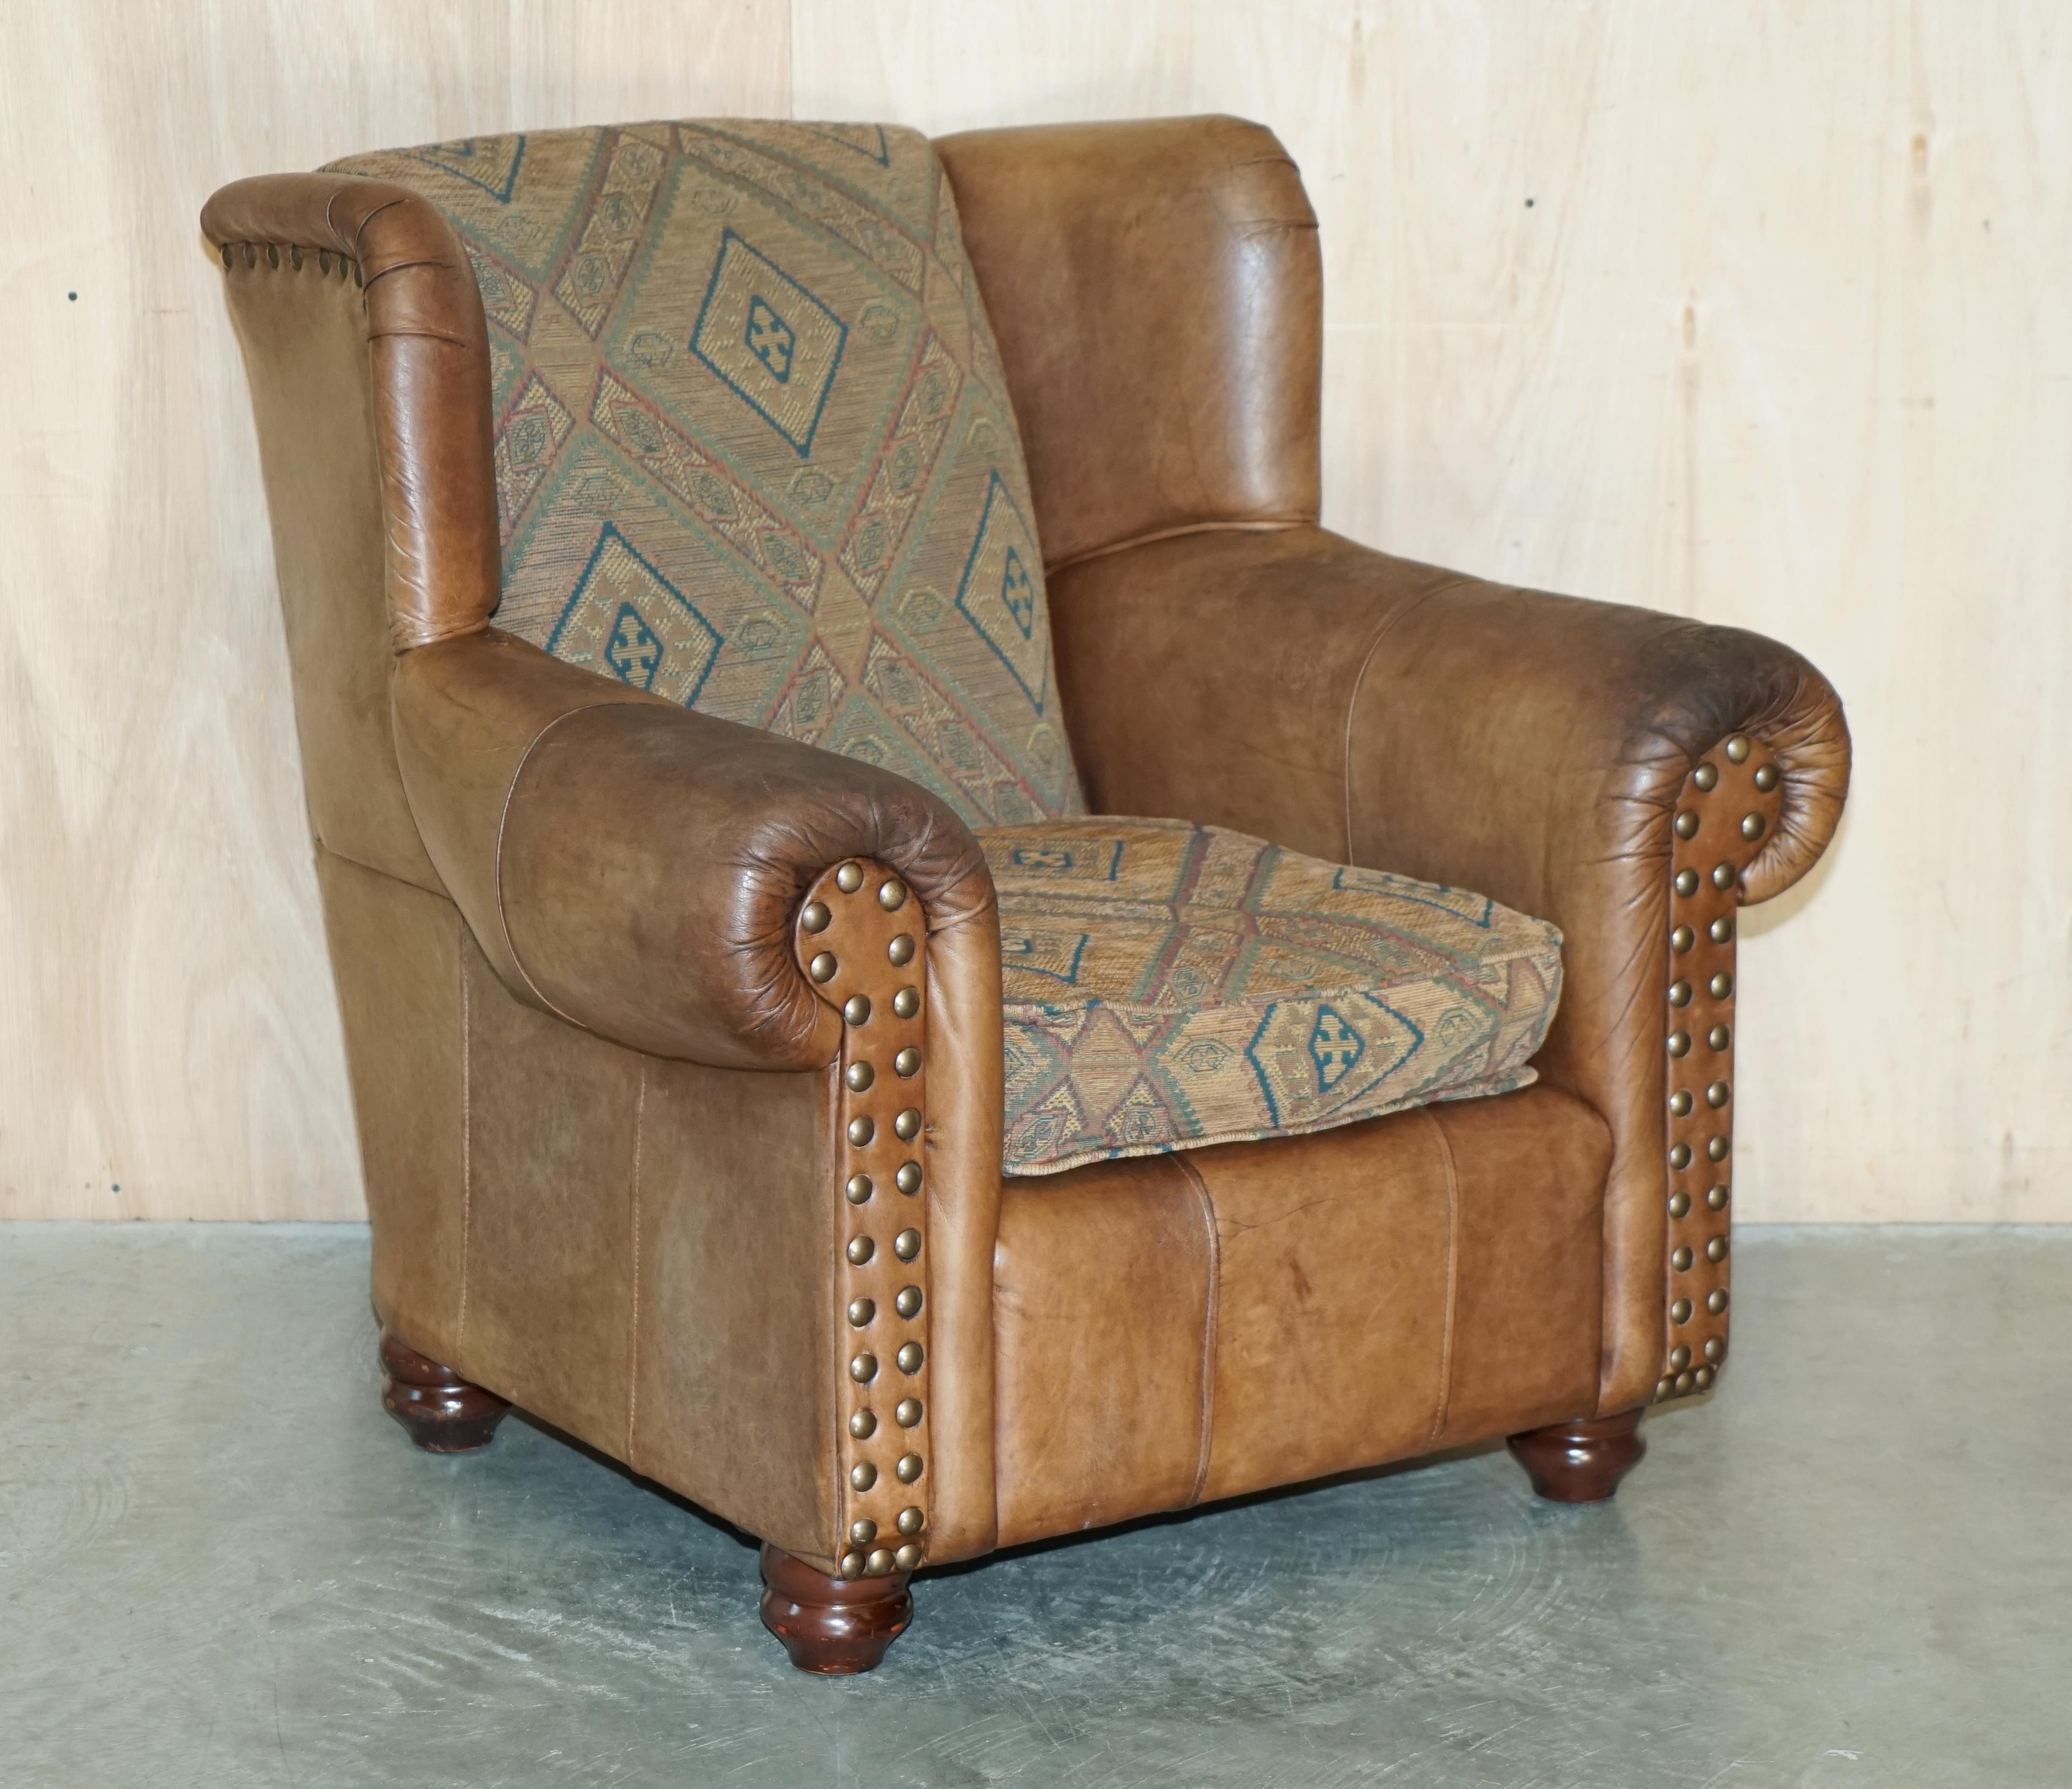 Royal House Antiques

Royal House Antiques is delighted to offer for sale this pair of Vintage, Gentleman's club distressed, Thomas Lloyd Armchairs in brown leather and kilim upholstery 

Please note the delivery fee listed is just a guide, it